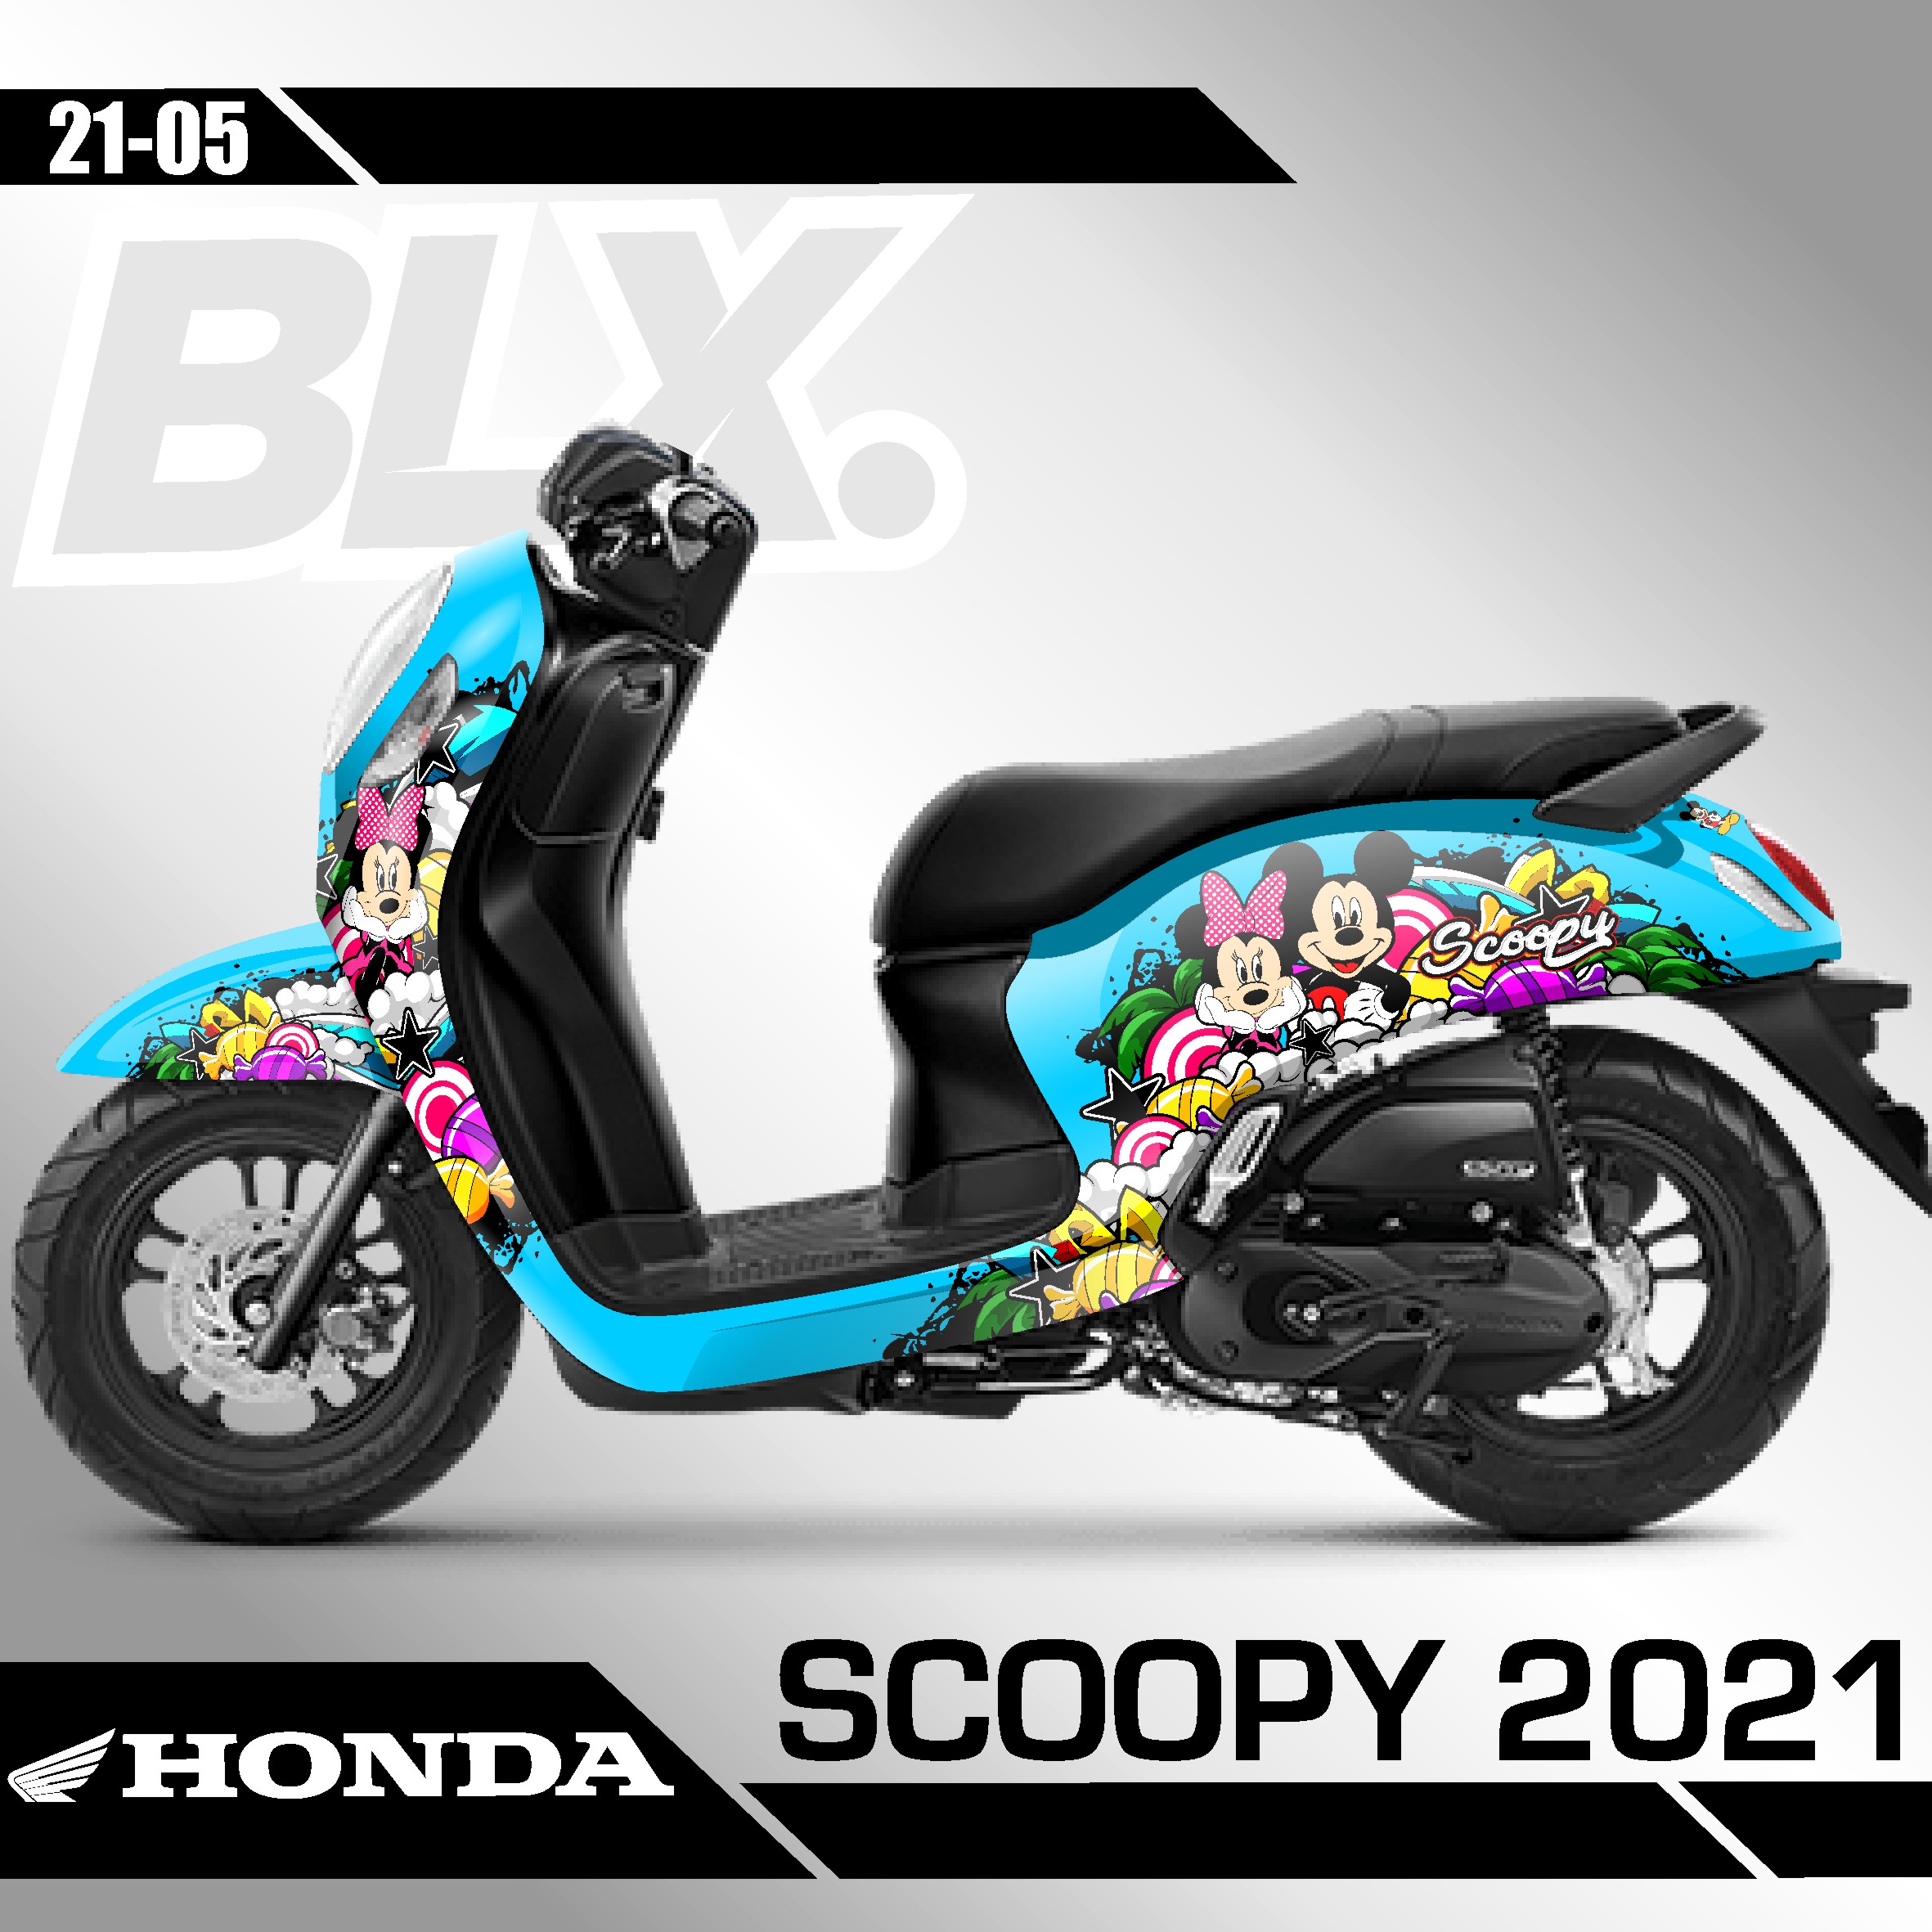 Decal Sticker Fullbody ALL NEW SCOOPY 2021 Mickey Mouse 21 05 Lazada Indonesia